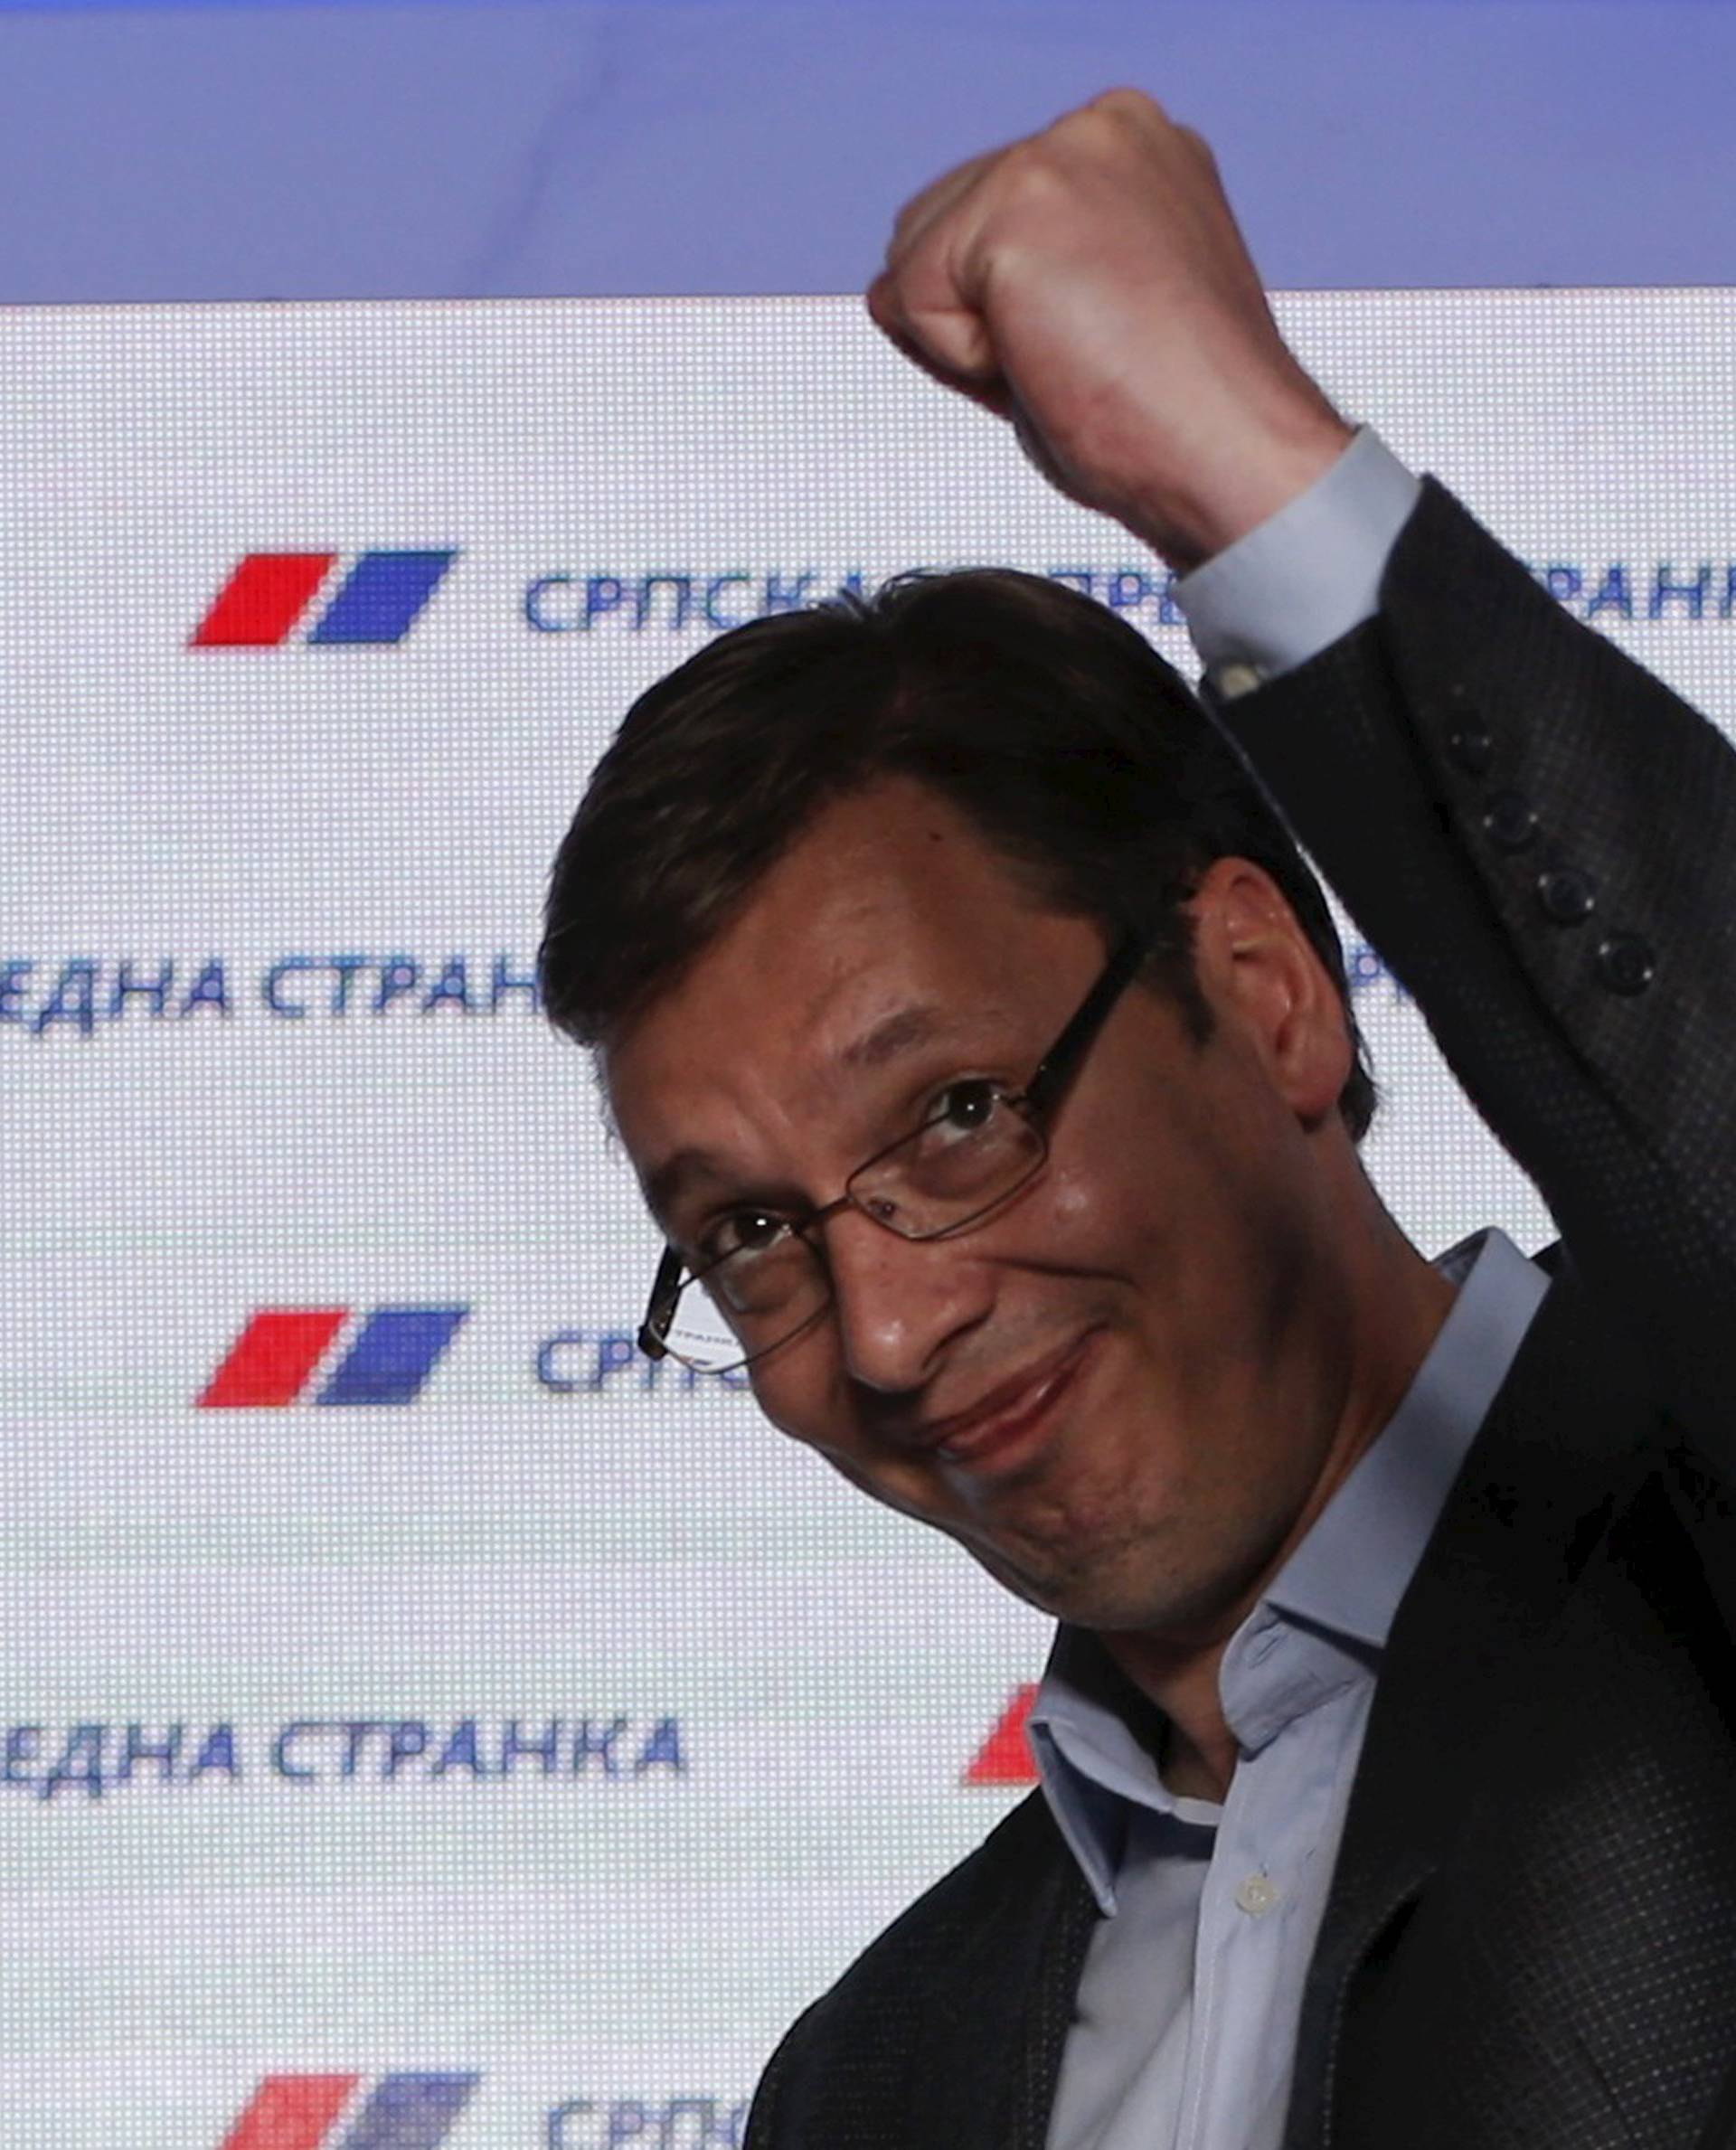 Serbian Prime Minister and leader of the Serbian Progressive Party  Vucic reacts after elections in Belgrade